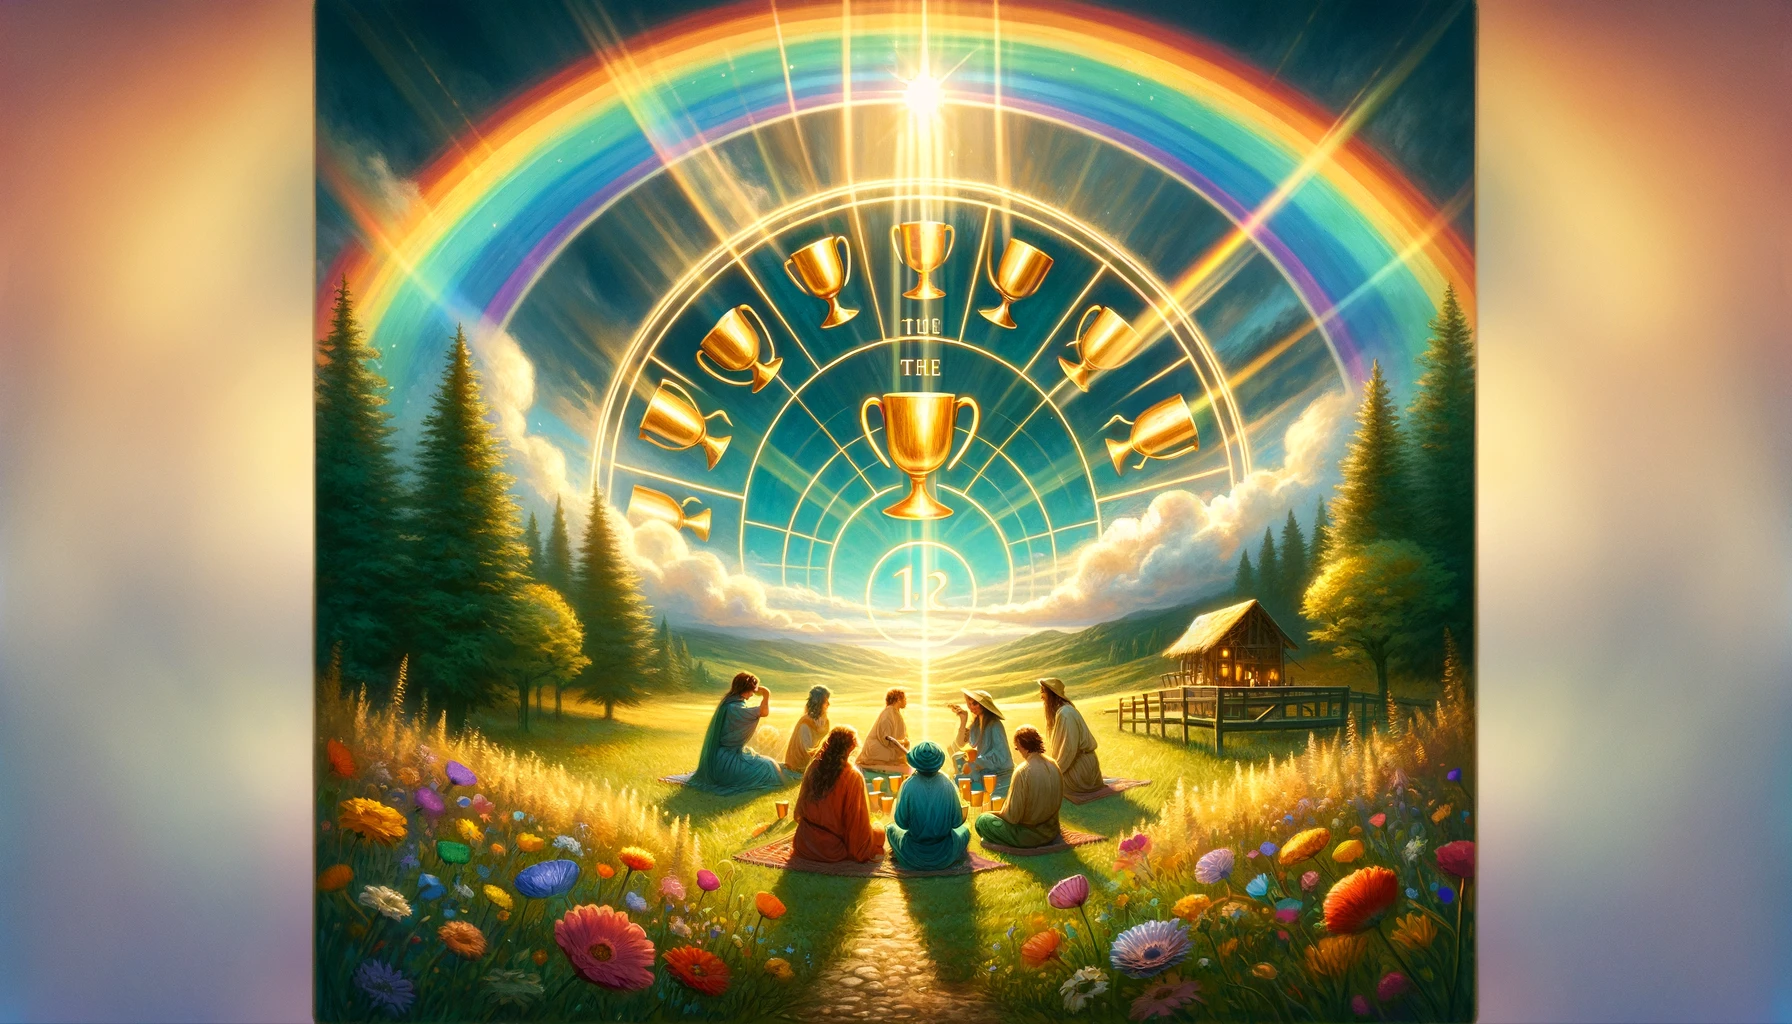 "Illustration depicting profound emotional fulfillment and happiness within relationships, shown through a harmonious gathering under a radiant rainbow, symbolizing celebratory and heartwarming essence."